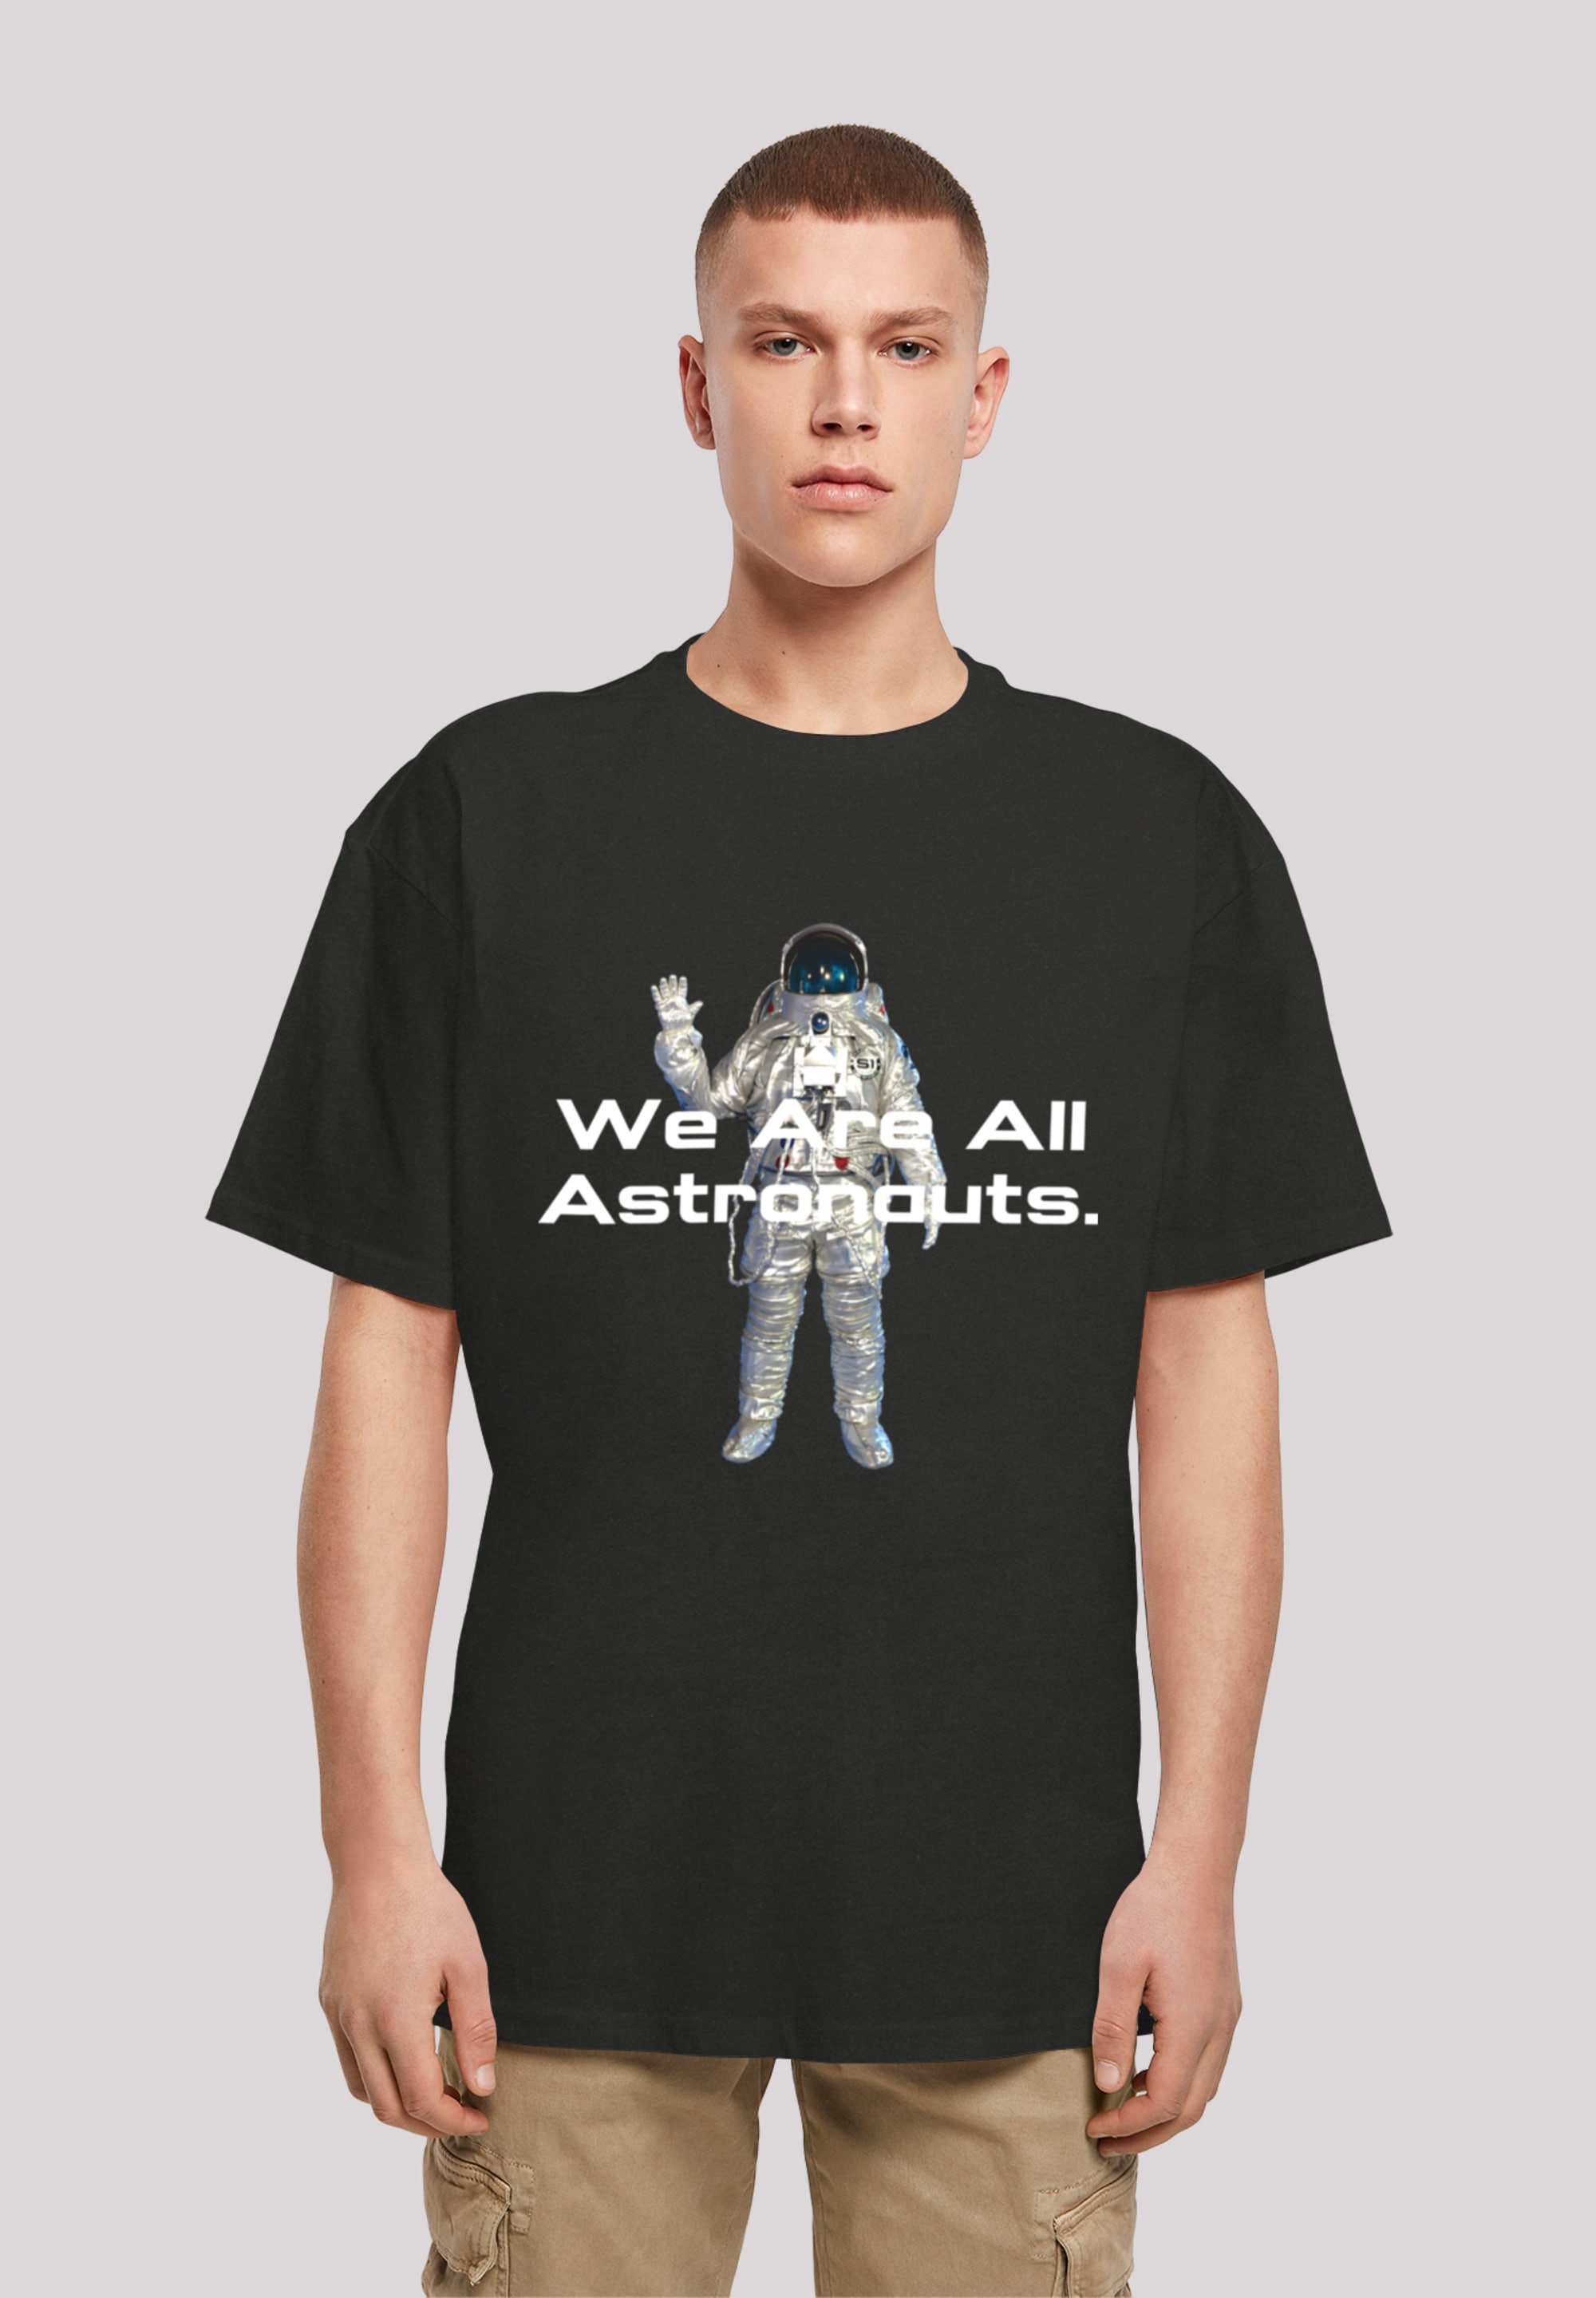 F4NT4STIC T-Shirt »PHIBER Print kaufen We all SpaceOne astronauts«, ▷ BAUR are 